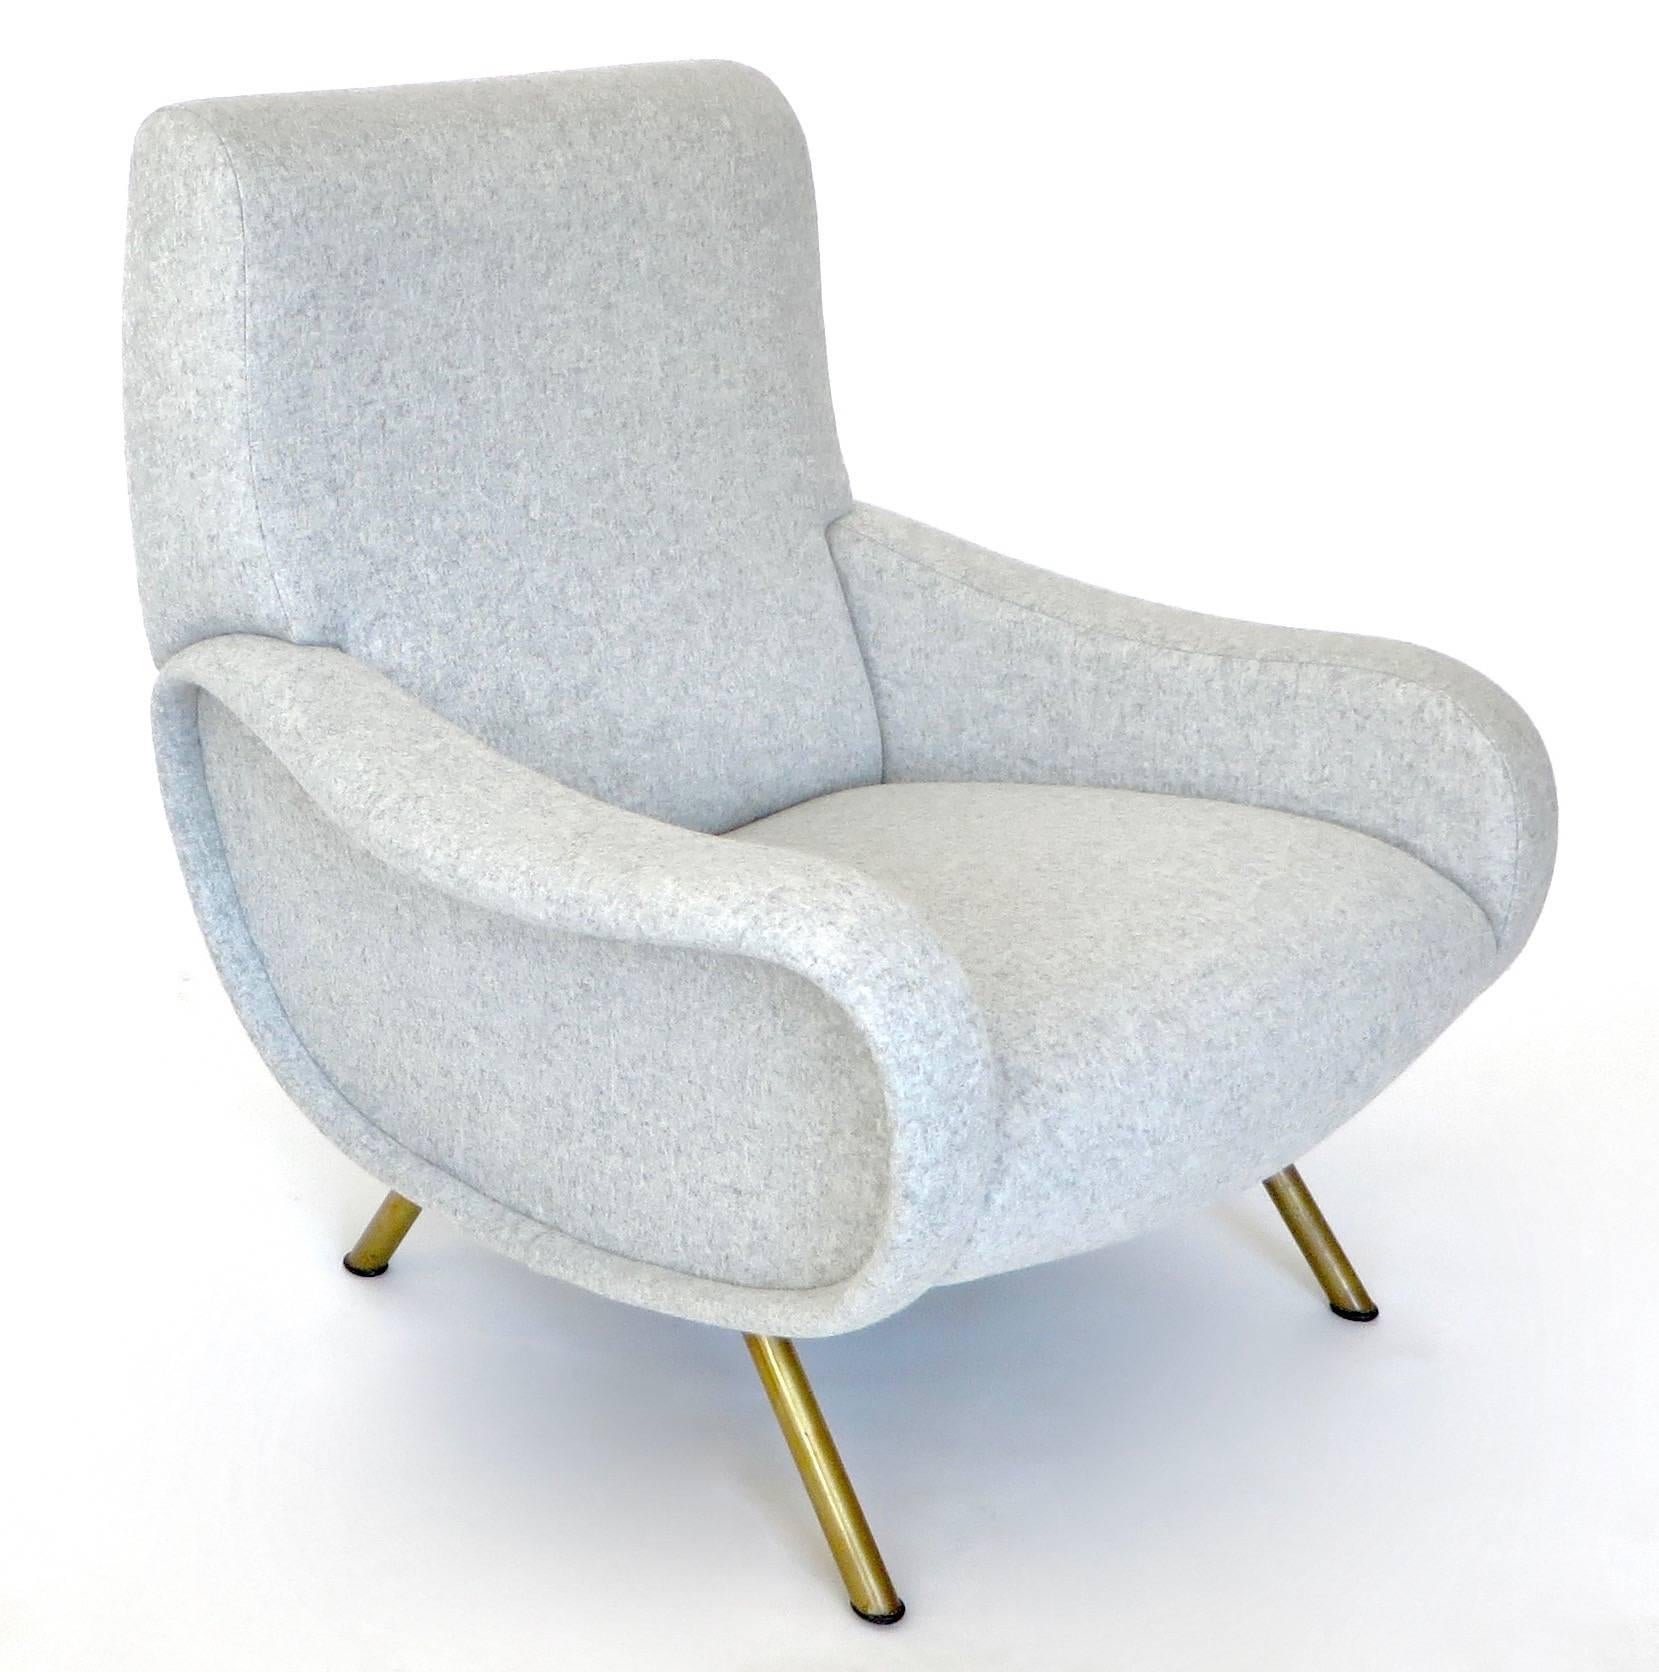 The lady chair was designed by Marco Zanuso for Arflex in 1951.
It won the award Medaglia d’oro or Gold Medal at the Milan IX Triennale in 1951. 
Newly restored and reupholstered in Maraham Davina light gray wool, original brass legs.
Overall